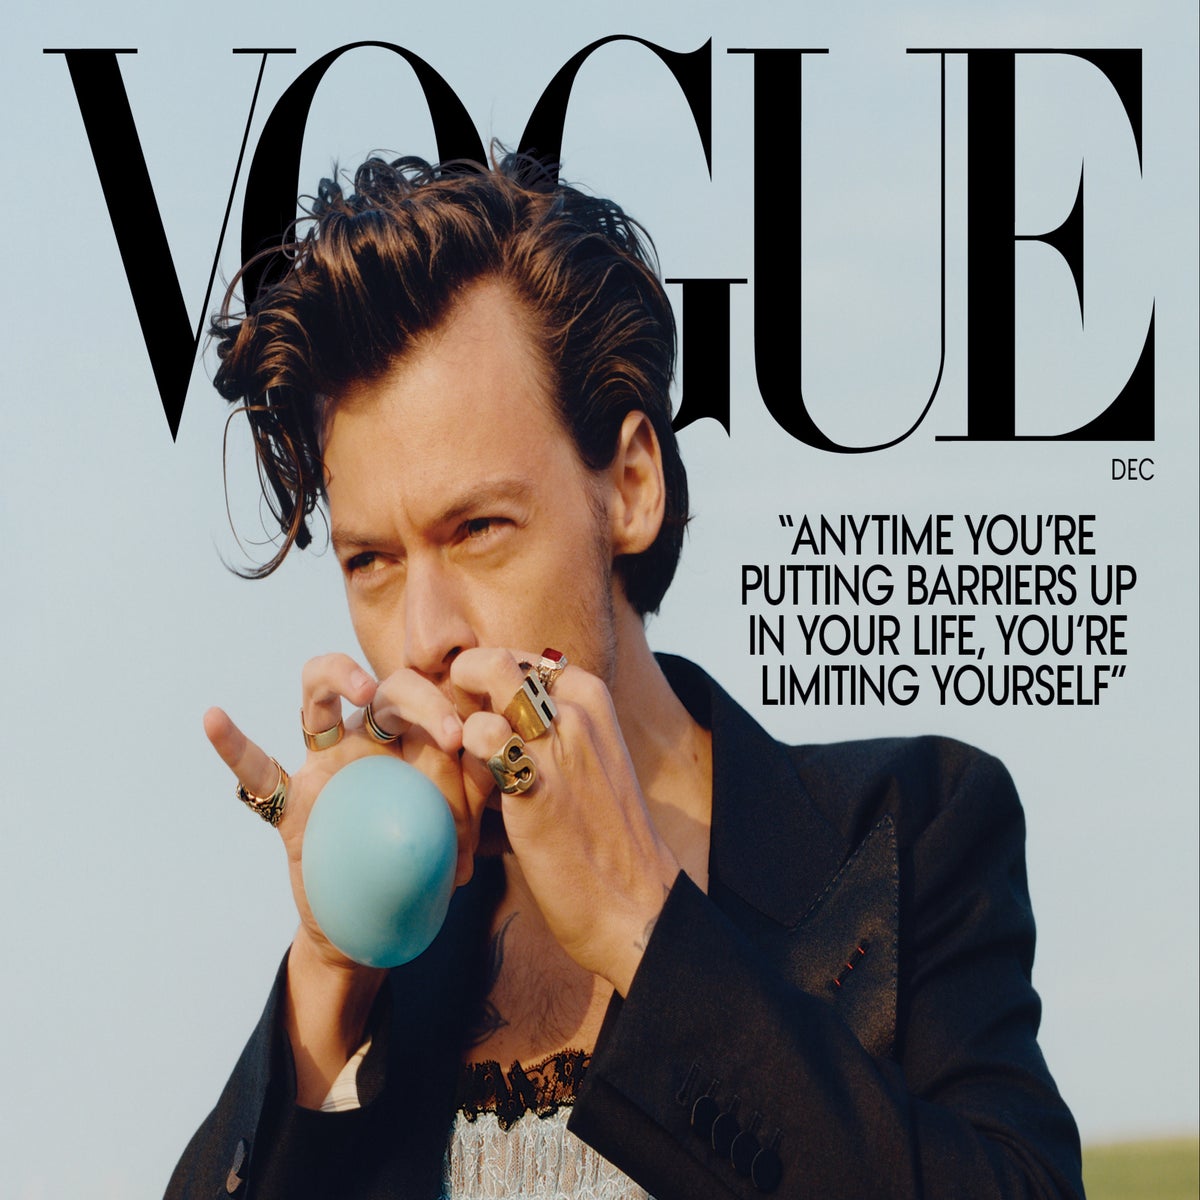 Harry Styles becomes first man to appear solo on cover of Vogue